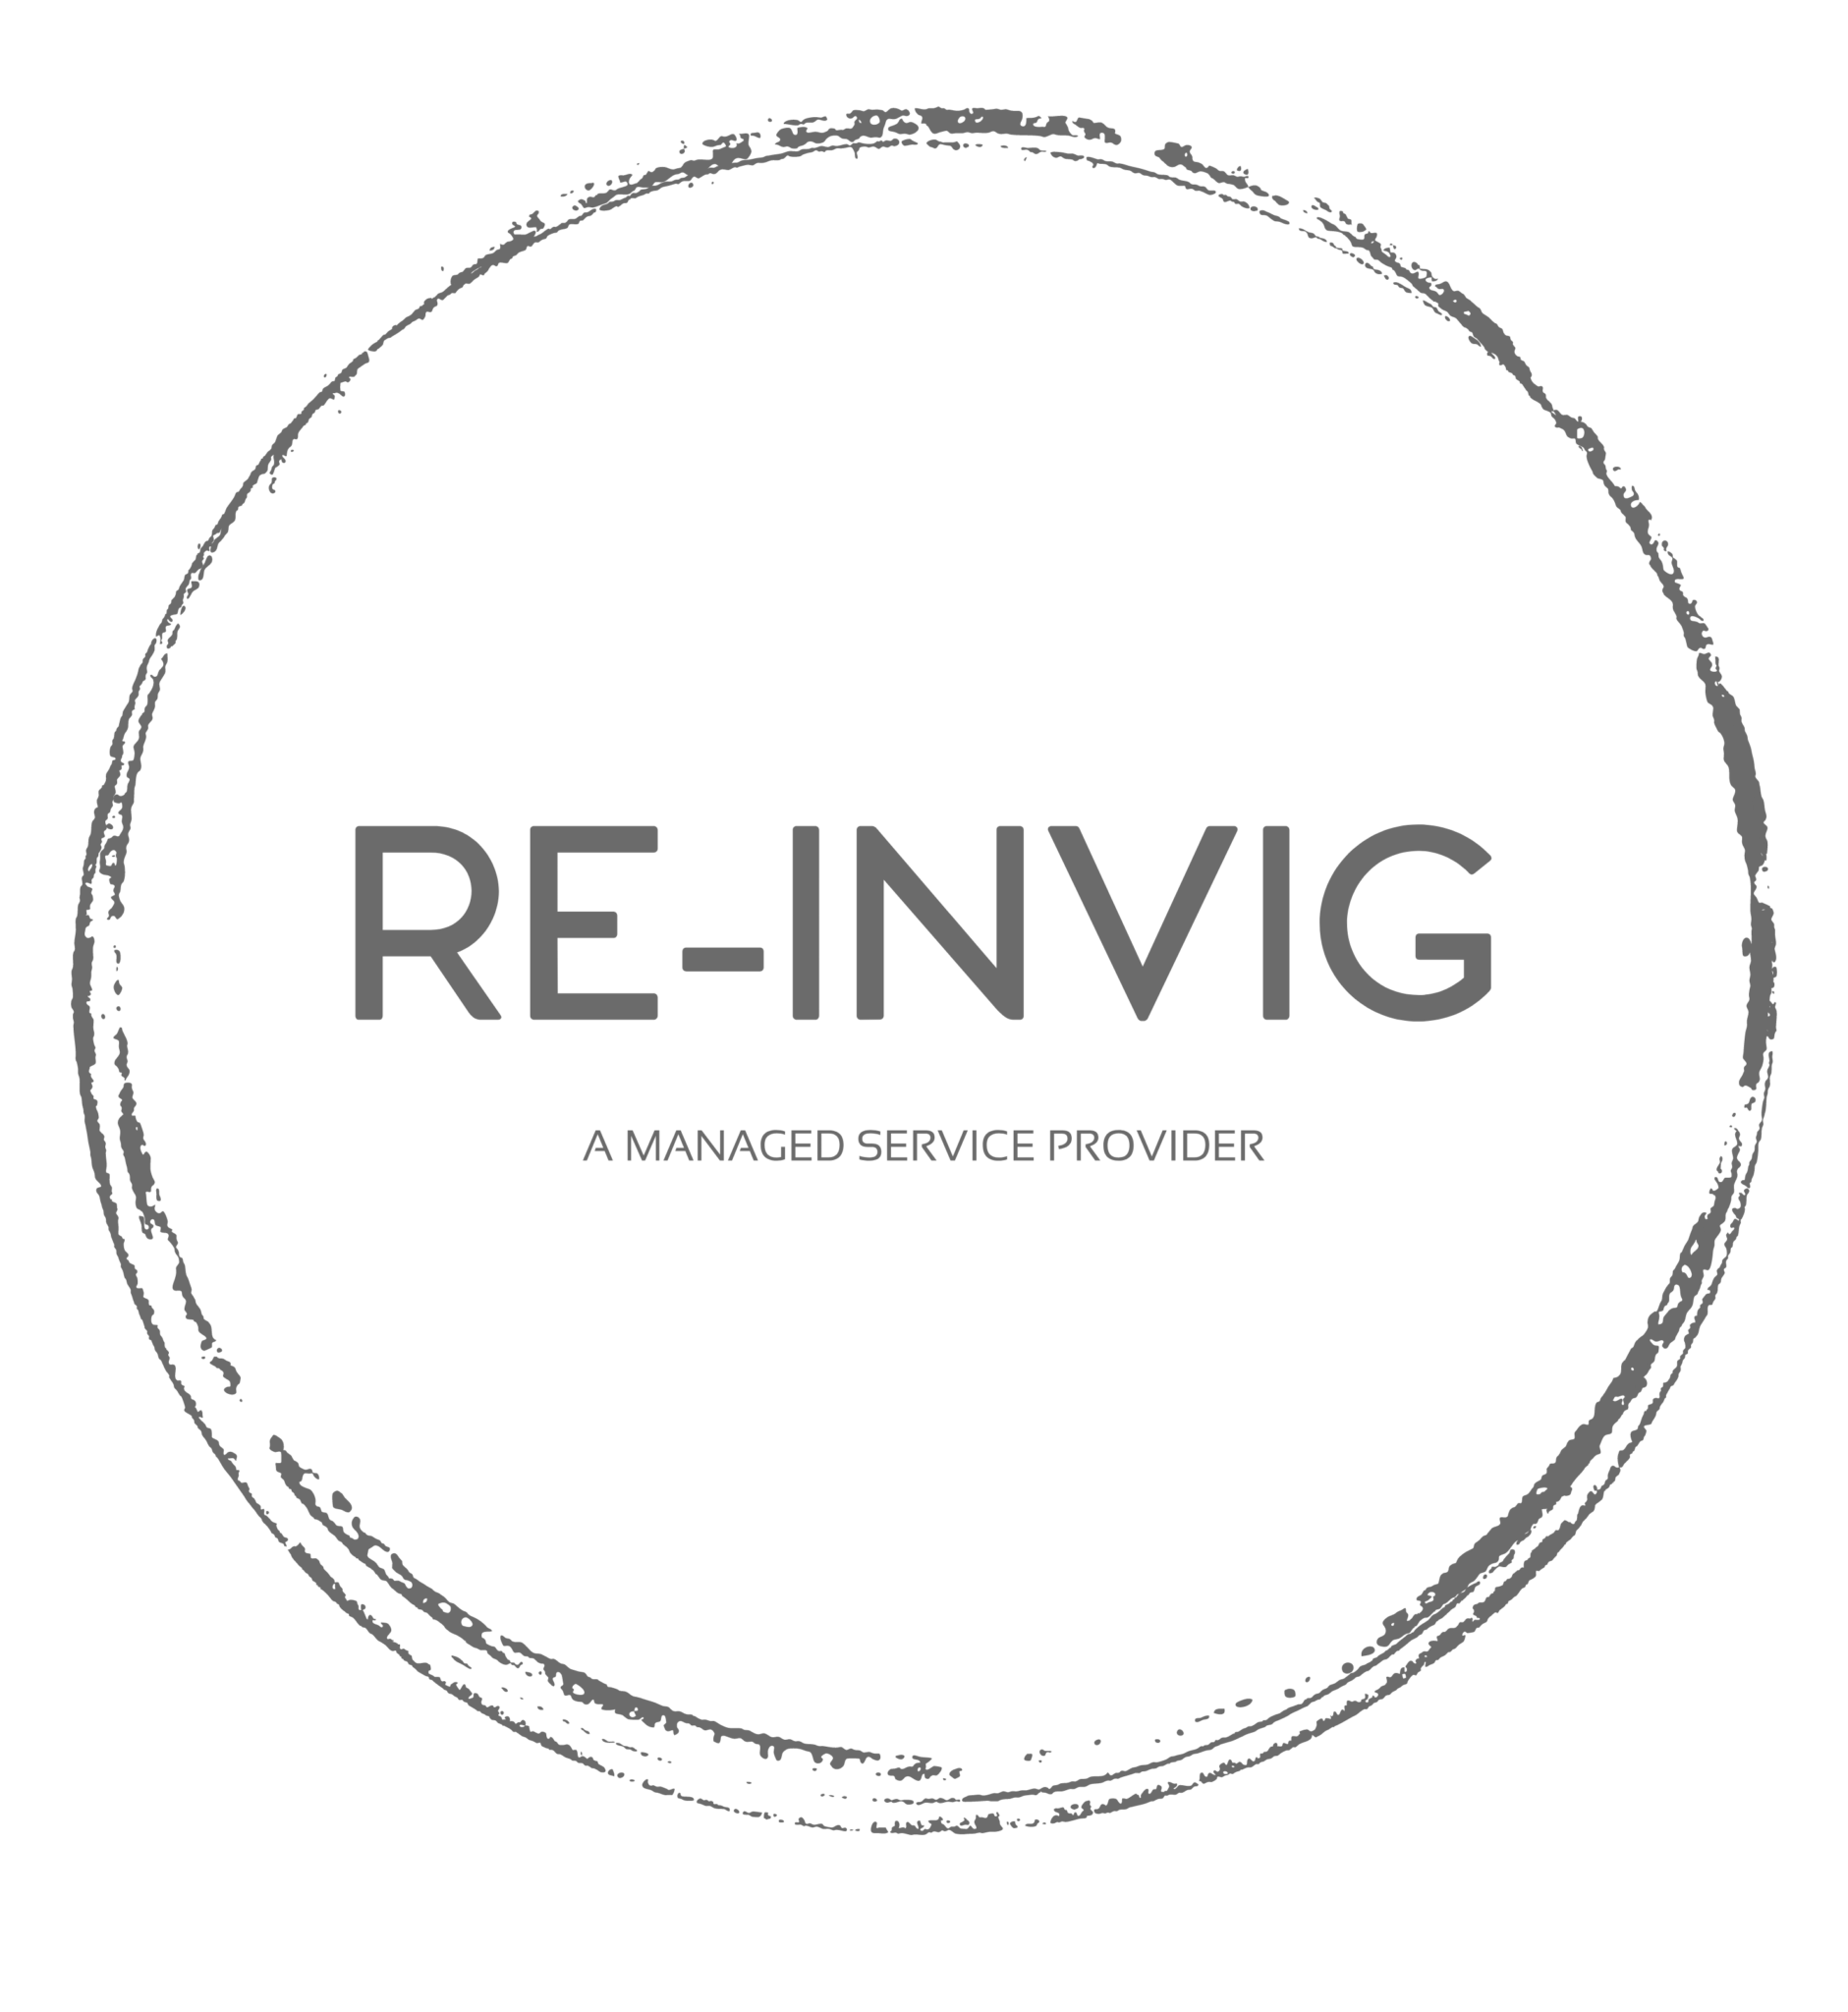 New Managed Services Provider RE-INVIG Launches Today